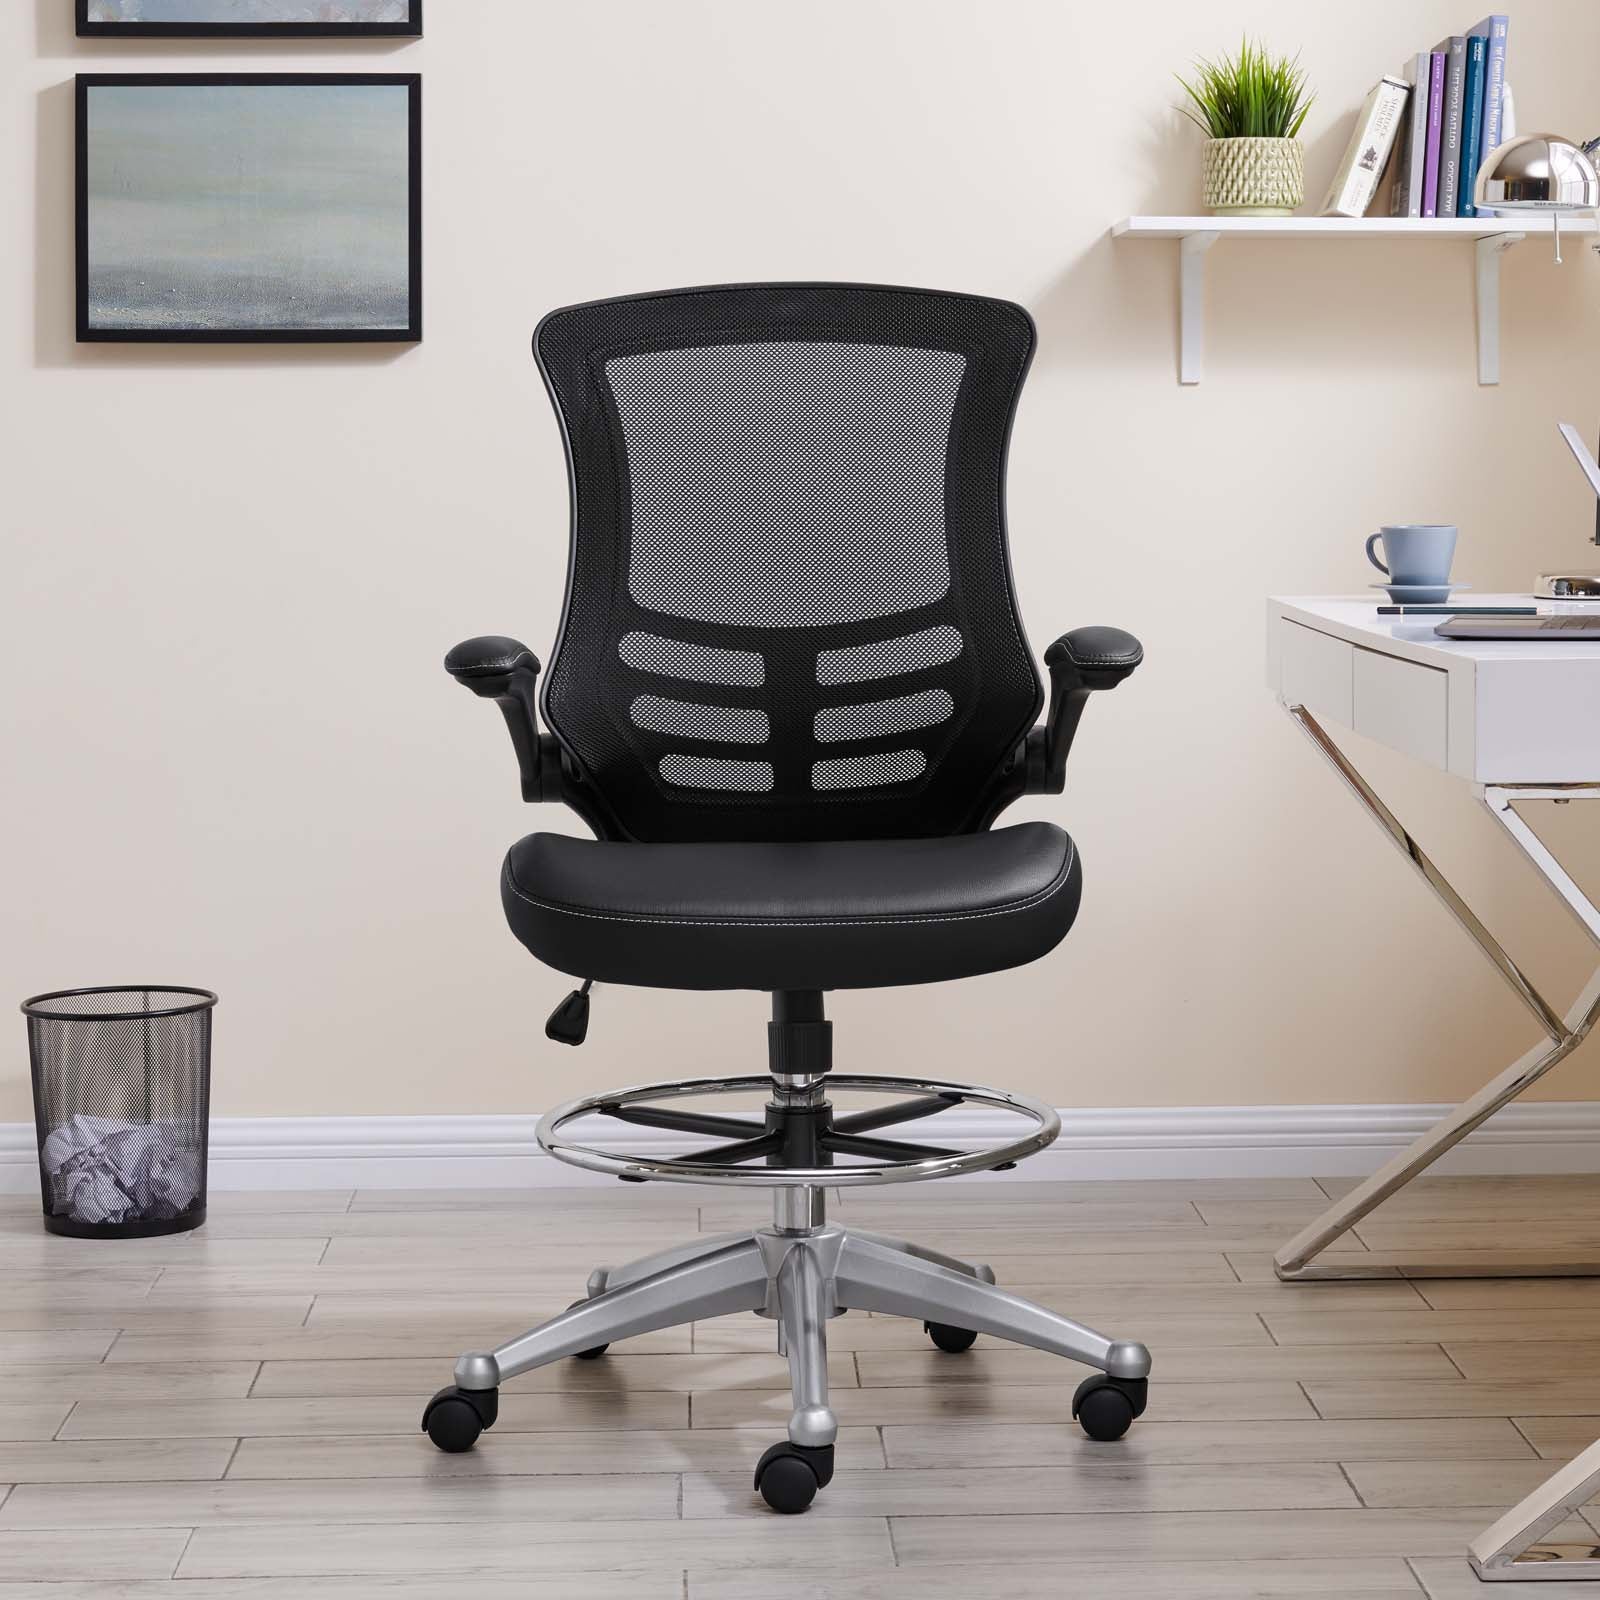 Modway Task Chairs - Attainment Vinyl Drafting Chair Black